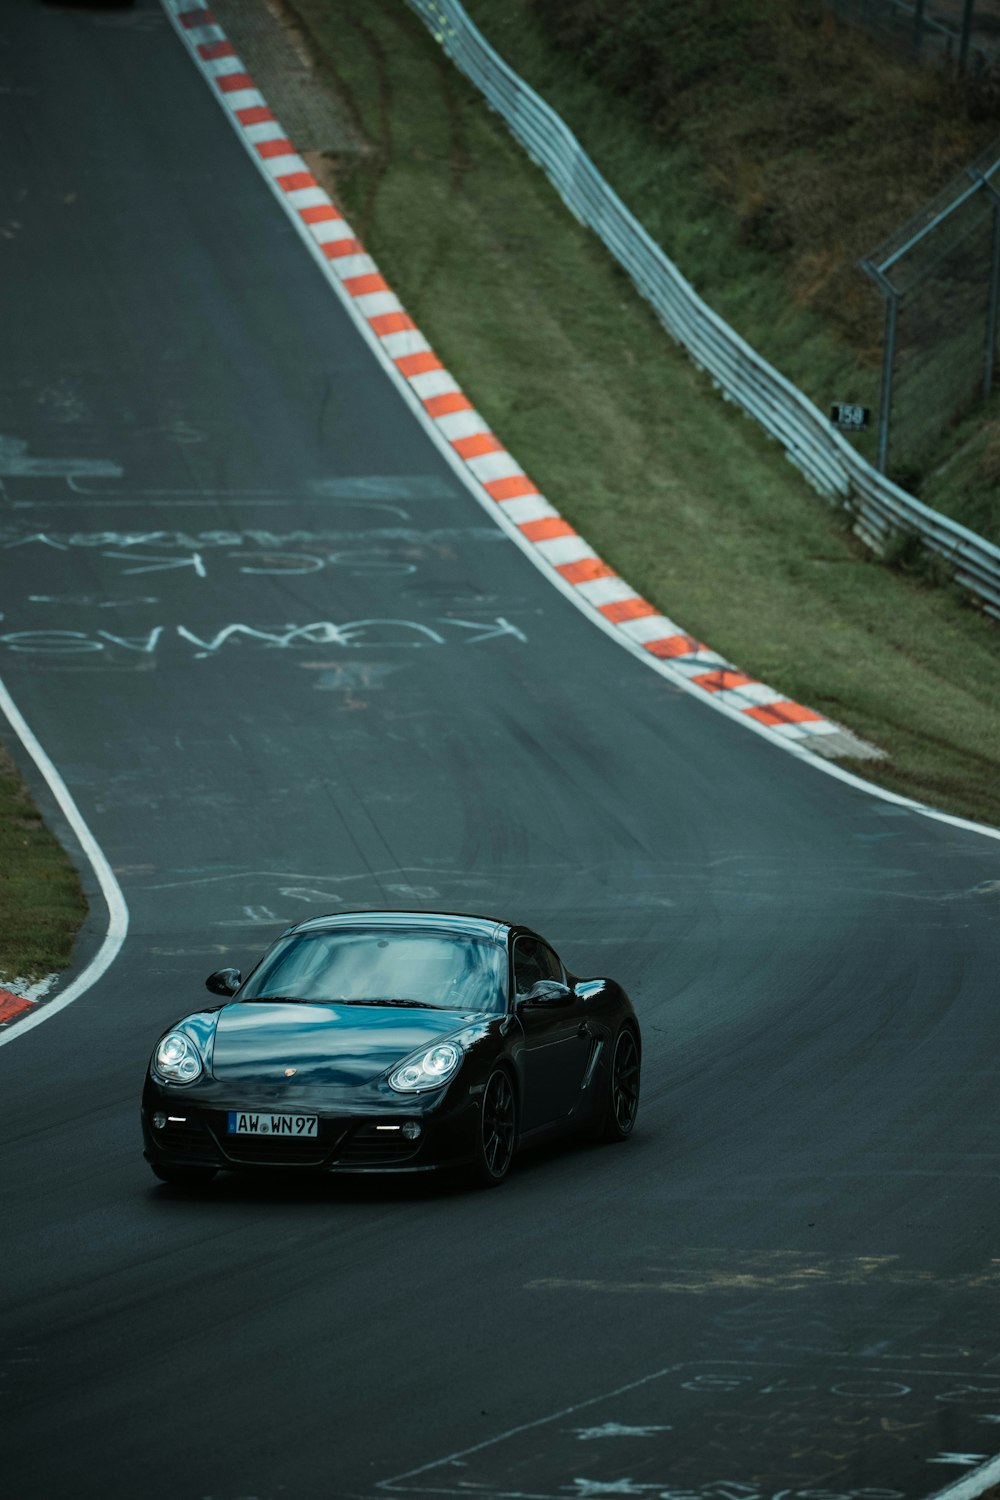 a black sports car driving on a race track